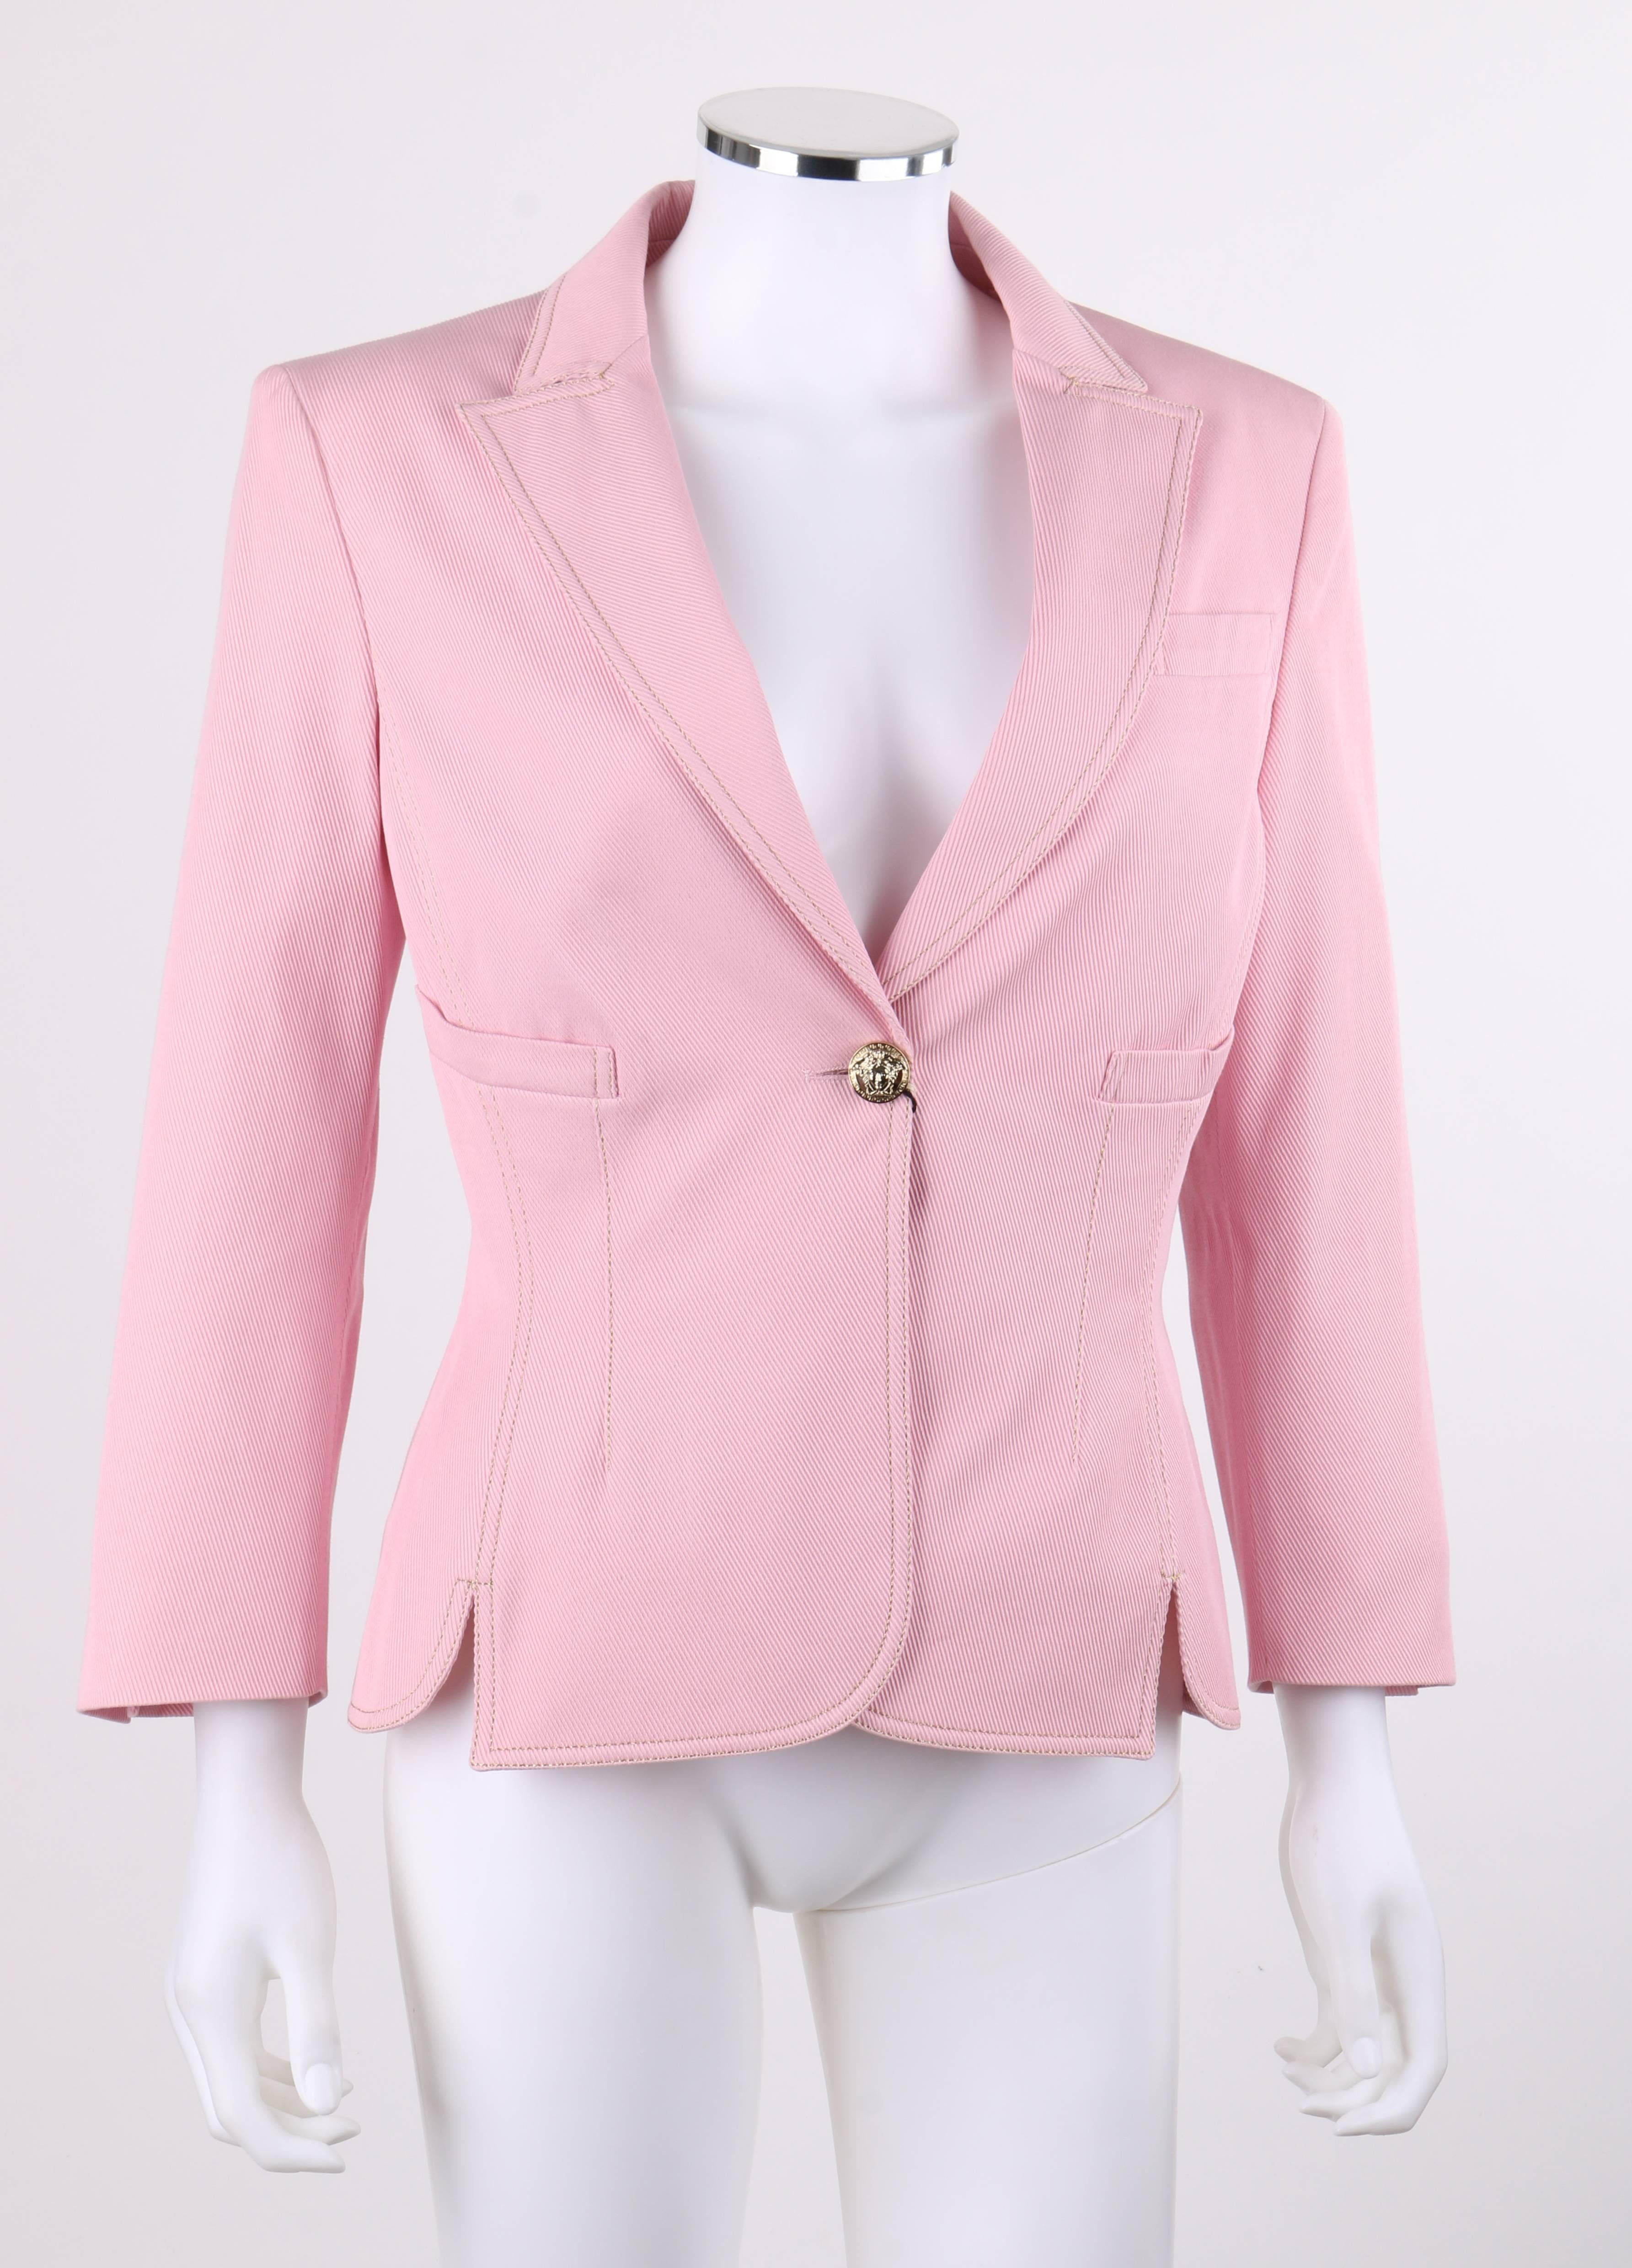 Versace Spring/Summer 2005 pink denim single button blazer; New with tags. Runway look #6 designed by Donatella Versace. Rose pink denim twill with contrasting metallic gold top stitching.  Notched lapel collar. 3/4 length sleeves with five button